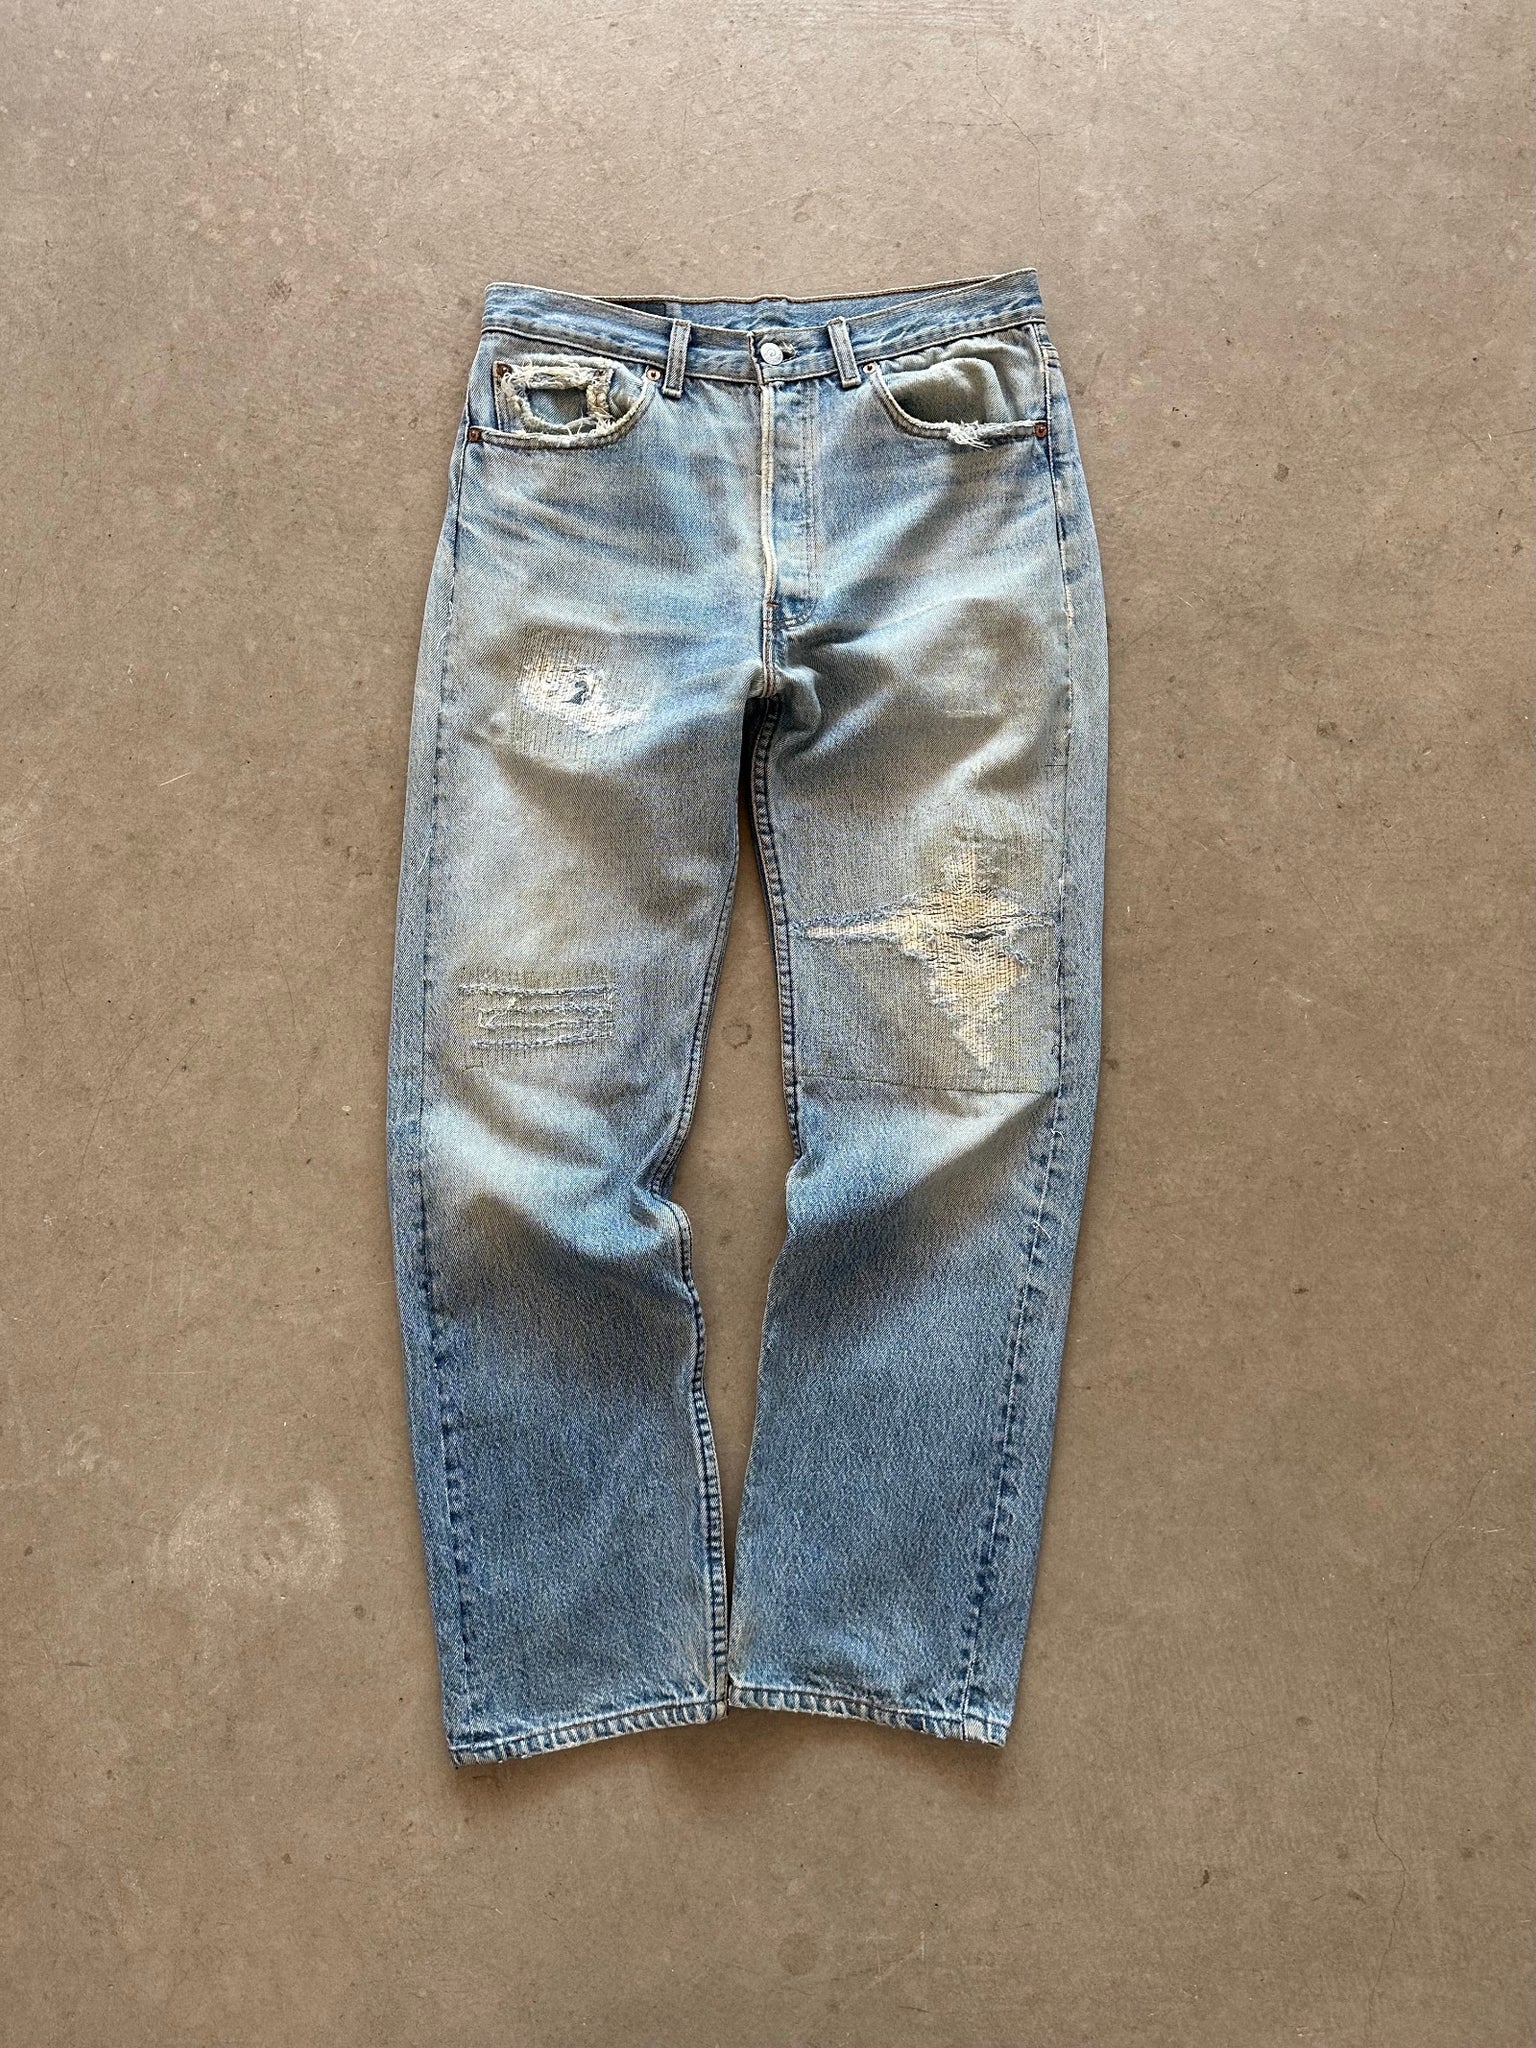 1992 Levi's 501xx Repaired Jeans - 33 x 32